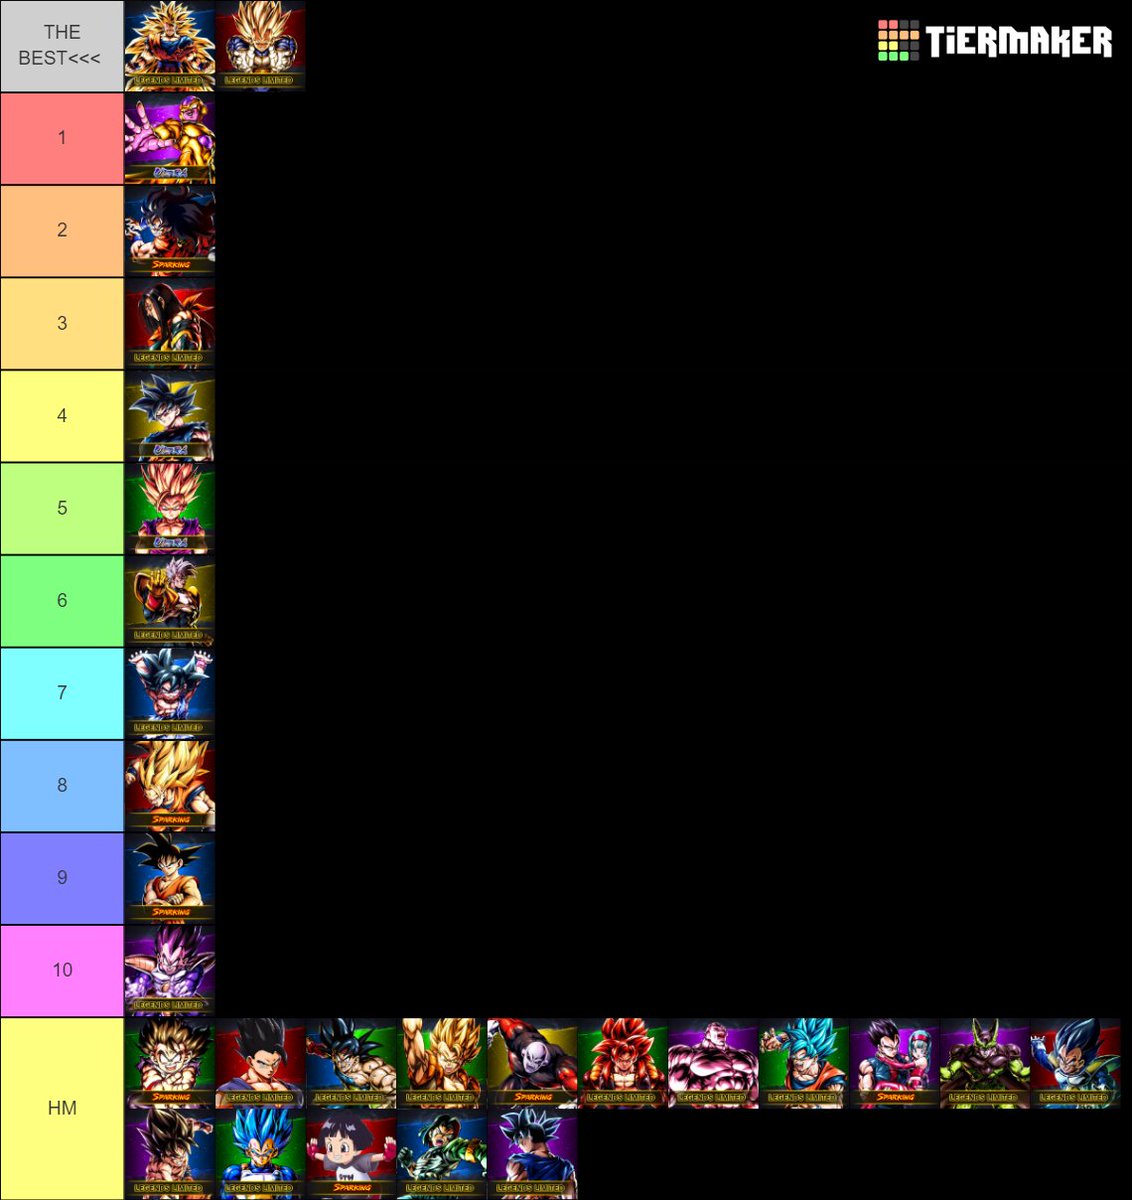 Everyone talking about goresh's tier list when mine is the superior one obviously (maybe I placed yamcha too high but he does too much tbh lol)